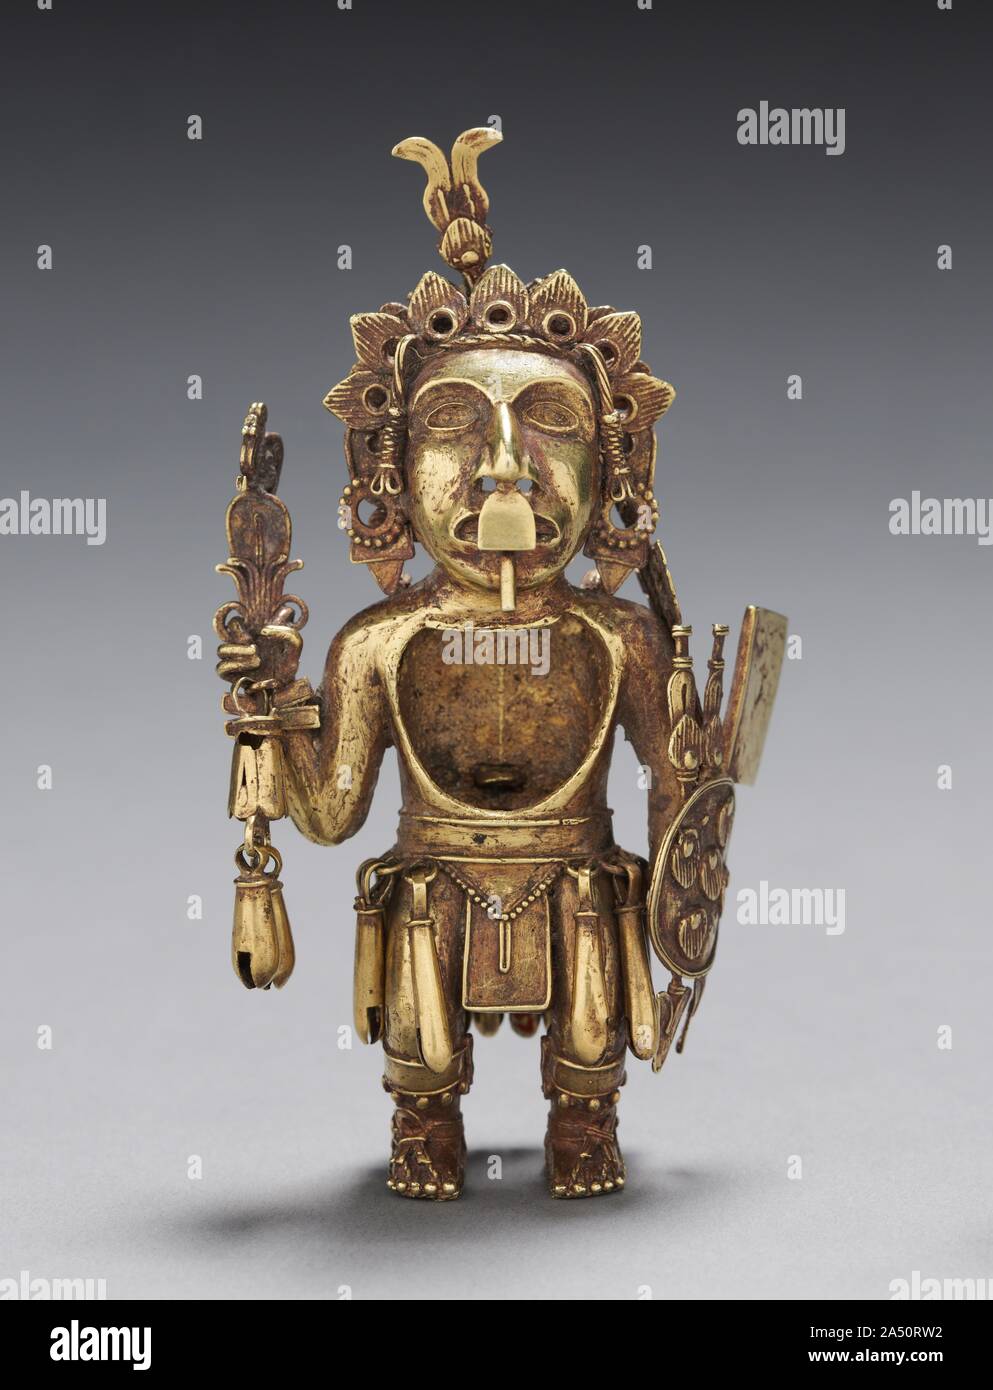 Figure of a Warrior, after 1325. The elite status of this warrior, who holds a dartthrower, darts, and a shield, is revealed by the gold from which he is made as well as his jewelry and sandals. Military accomplishment was prized by the Aztecs, whose imperial expansion was fueled by ambition as well as their belief that they were chosen to uphold cosmic order through war. The purpose of the chest cavity is unclear; the figurine may have been worn as a pendant. Stock Photo